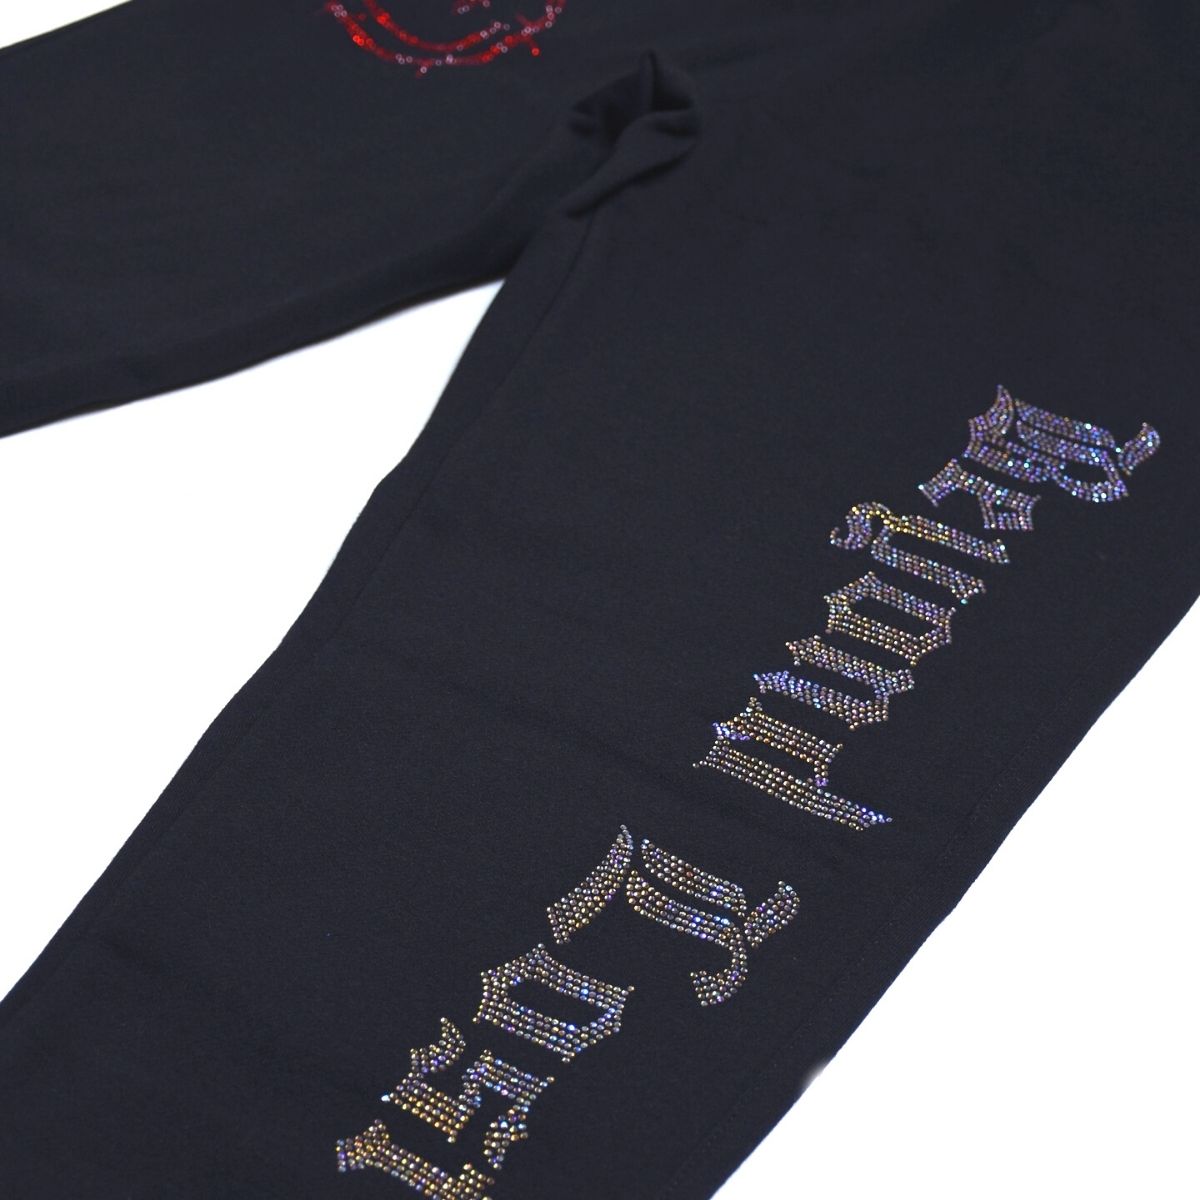 NEW! Black Rhinestone Sweats: Barbed Wire Smiley Face